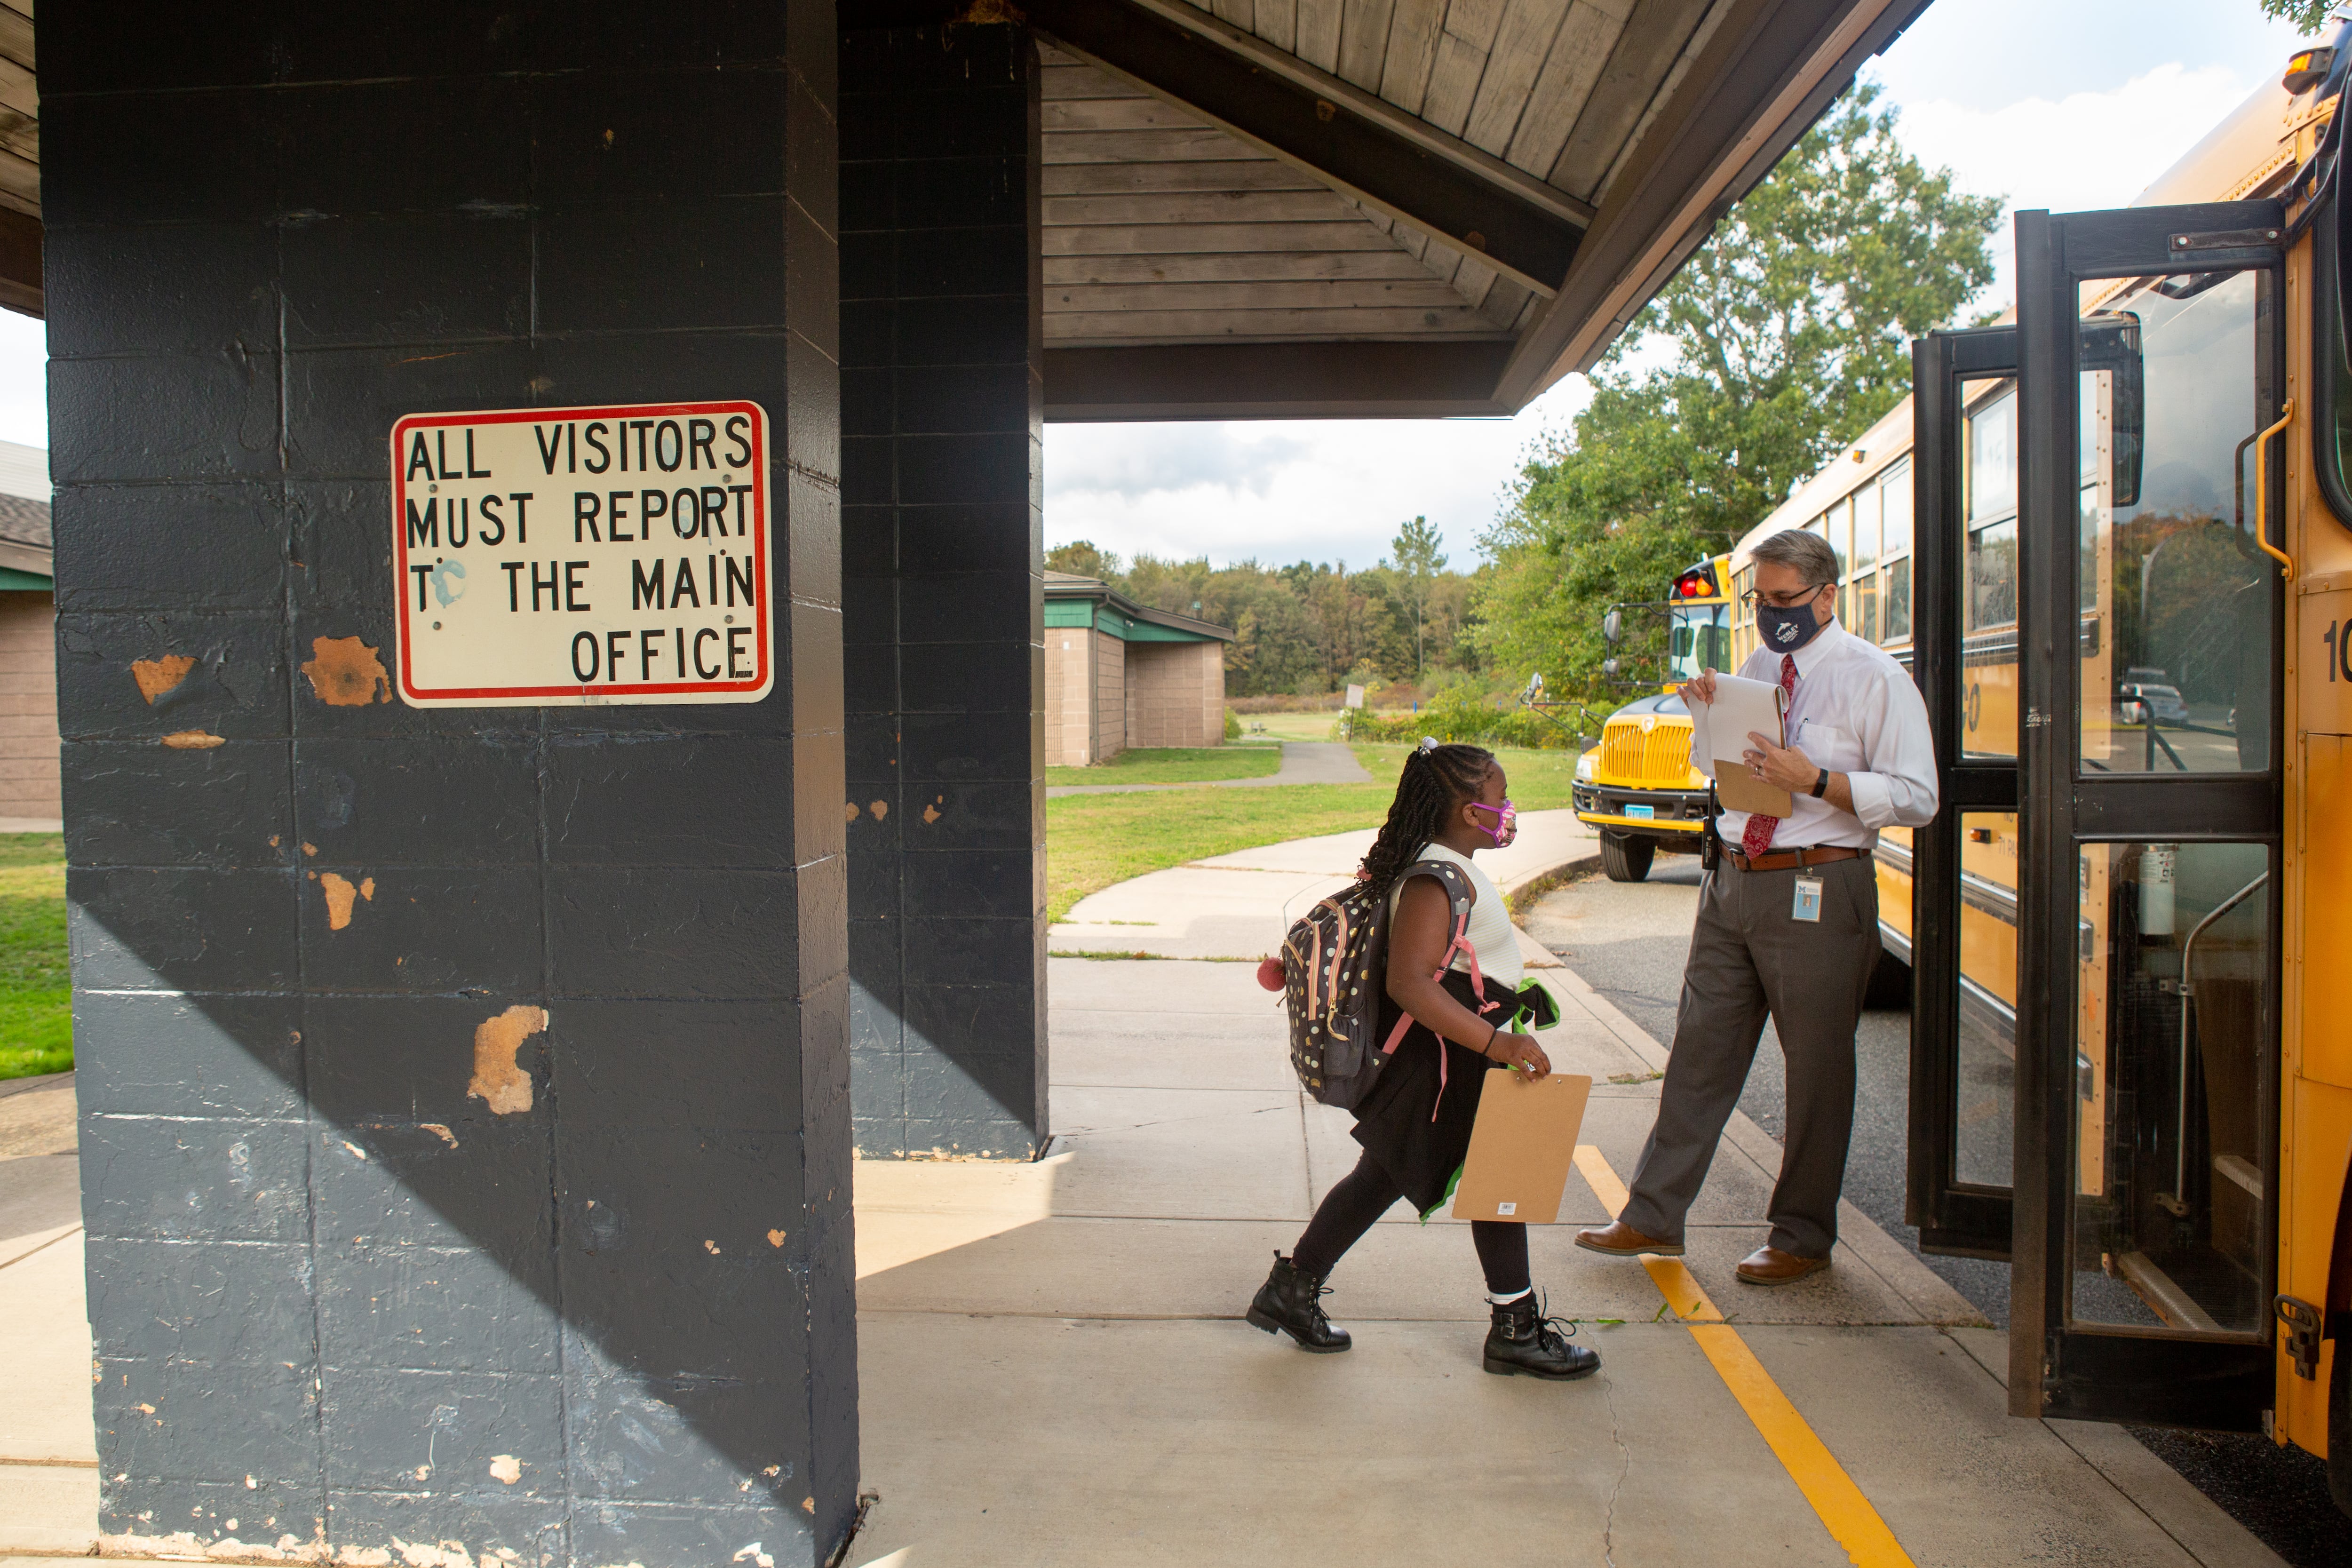 A student walks toward the open doors of a school bus while an employee stands near the door.